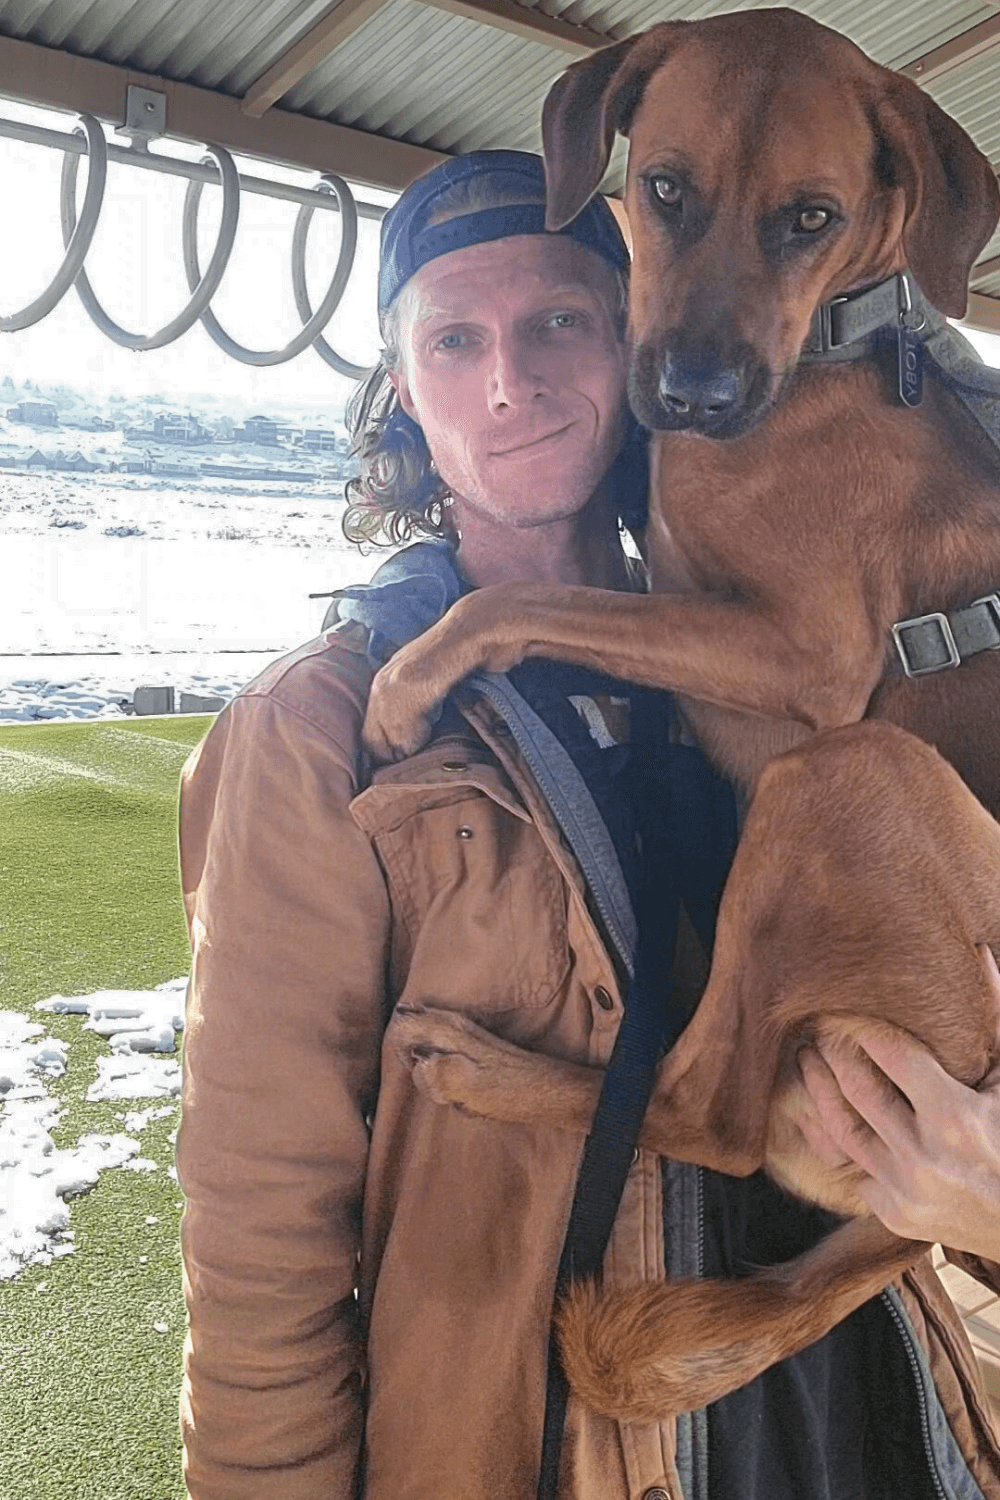 Iraq war veteran finds kindred spirit in athletic rescue dog